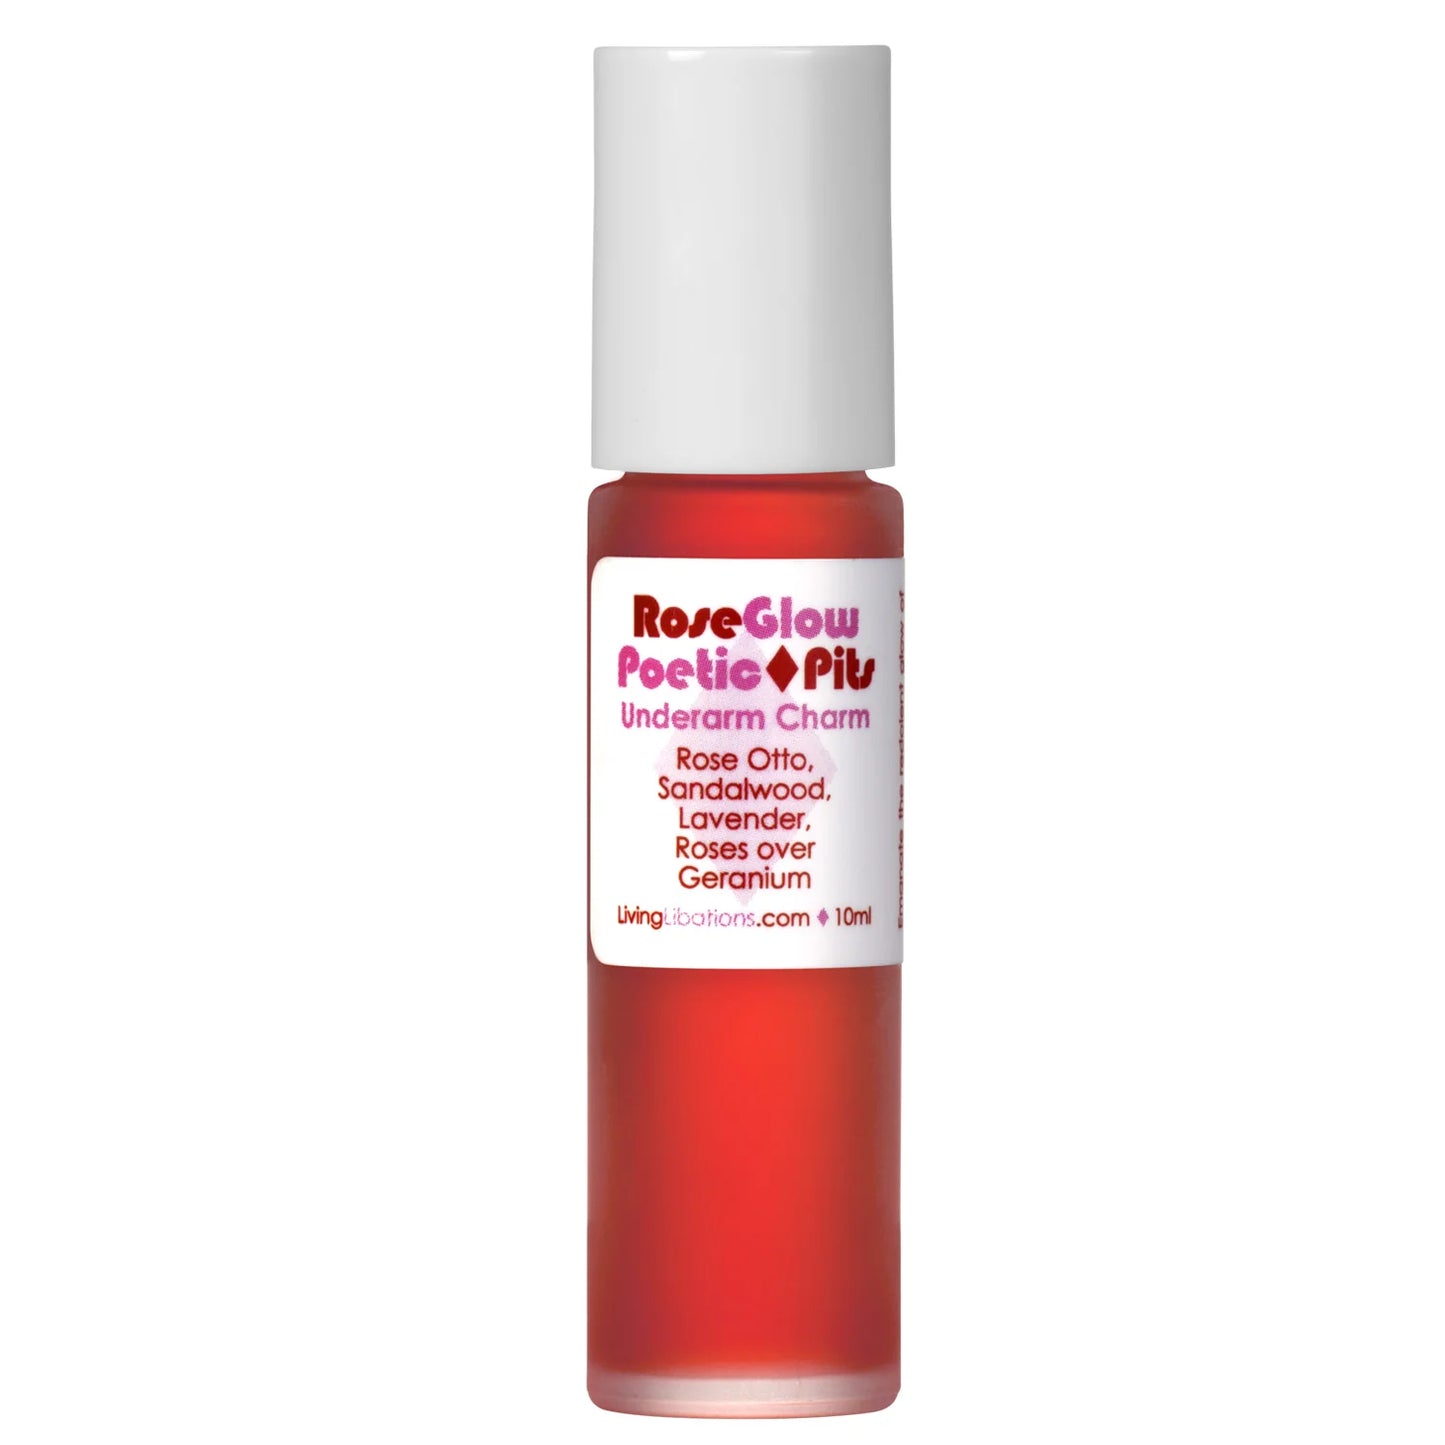 Poetic Pits Rose Glow Deodorant by Living Libations